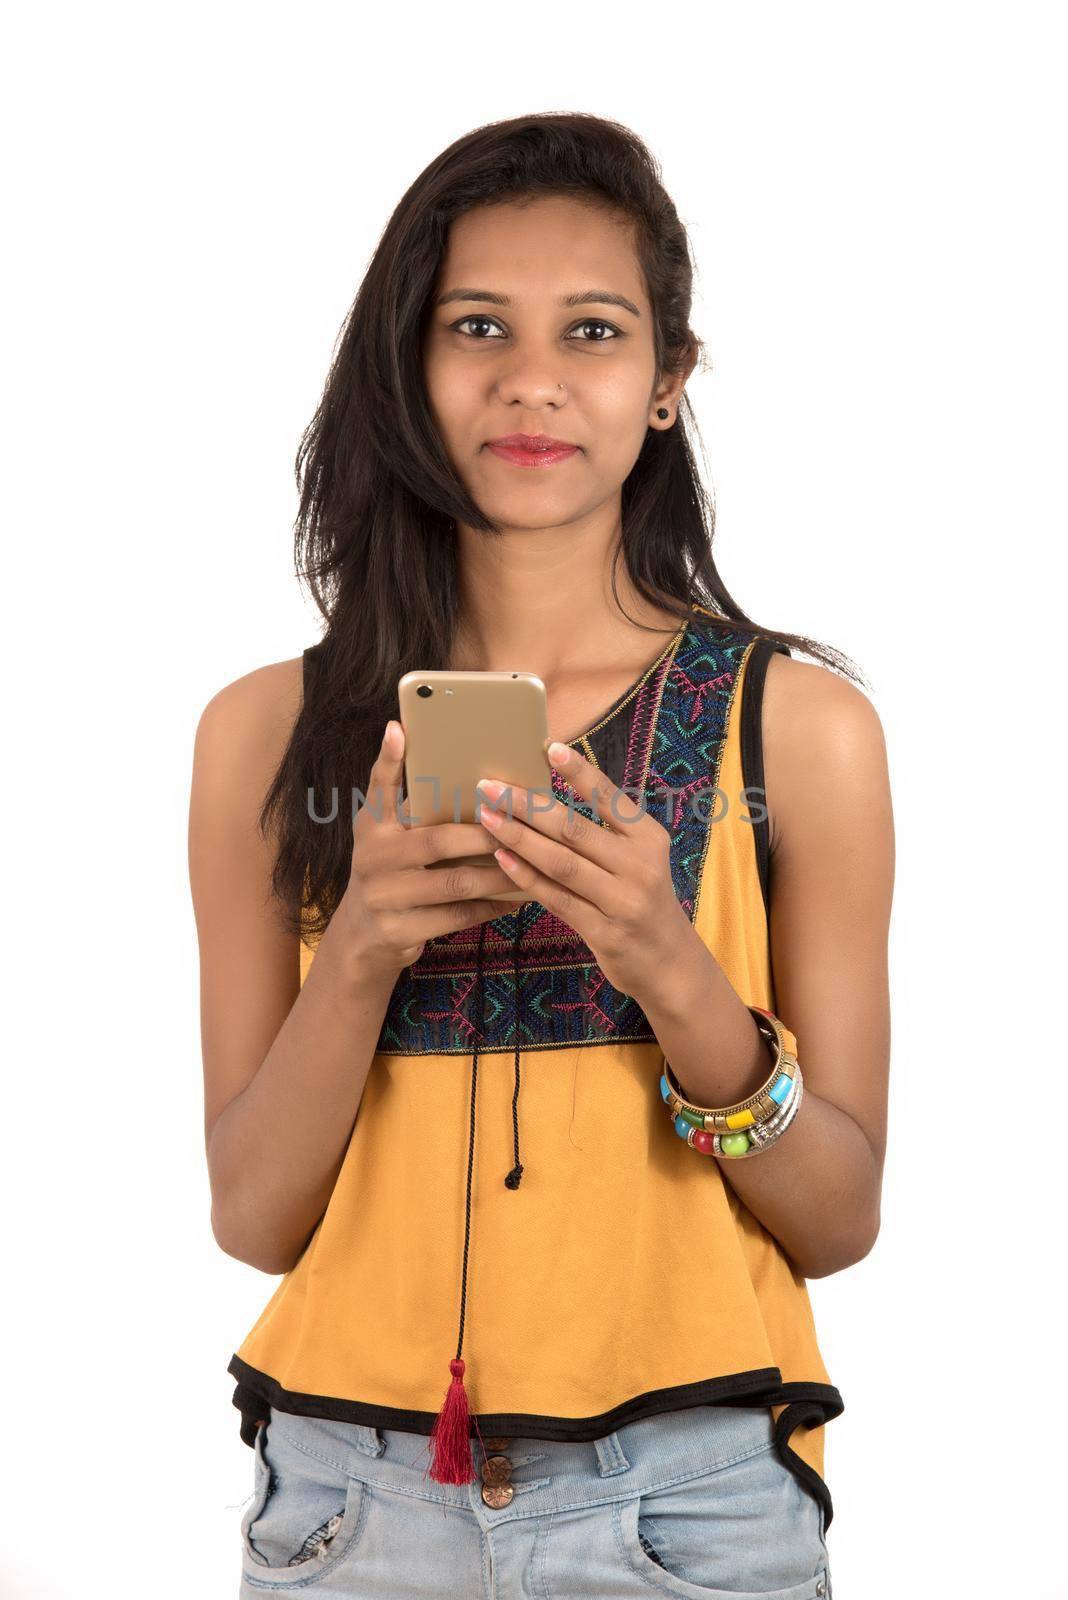 Portrait of a happy young girl using mobile phone isolated over white background